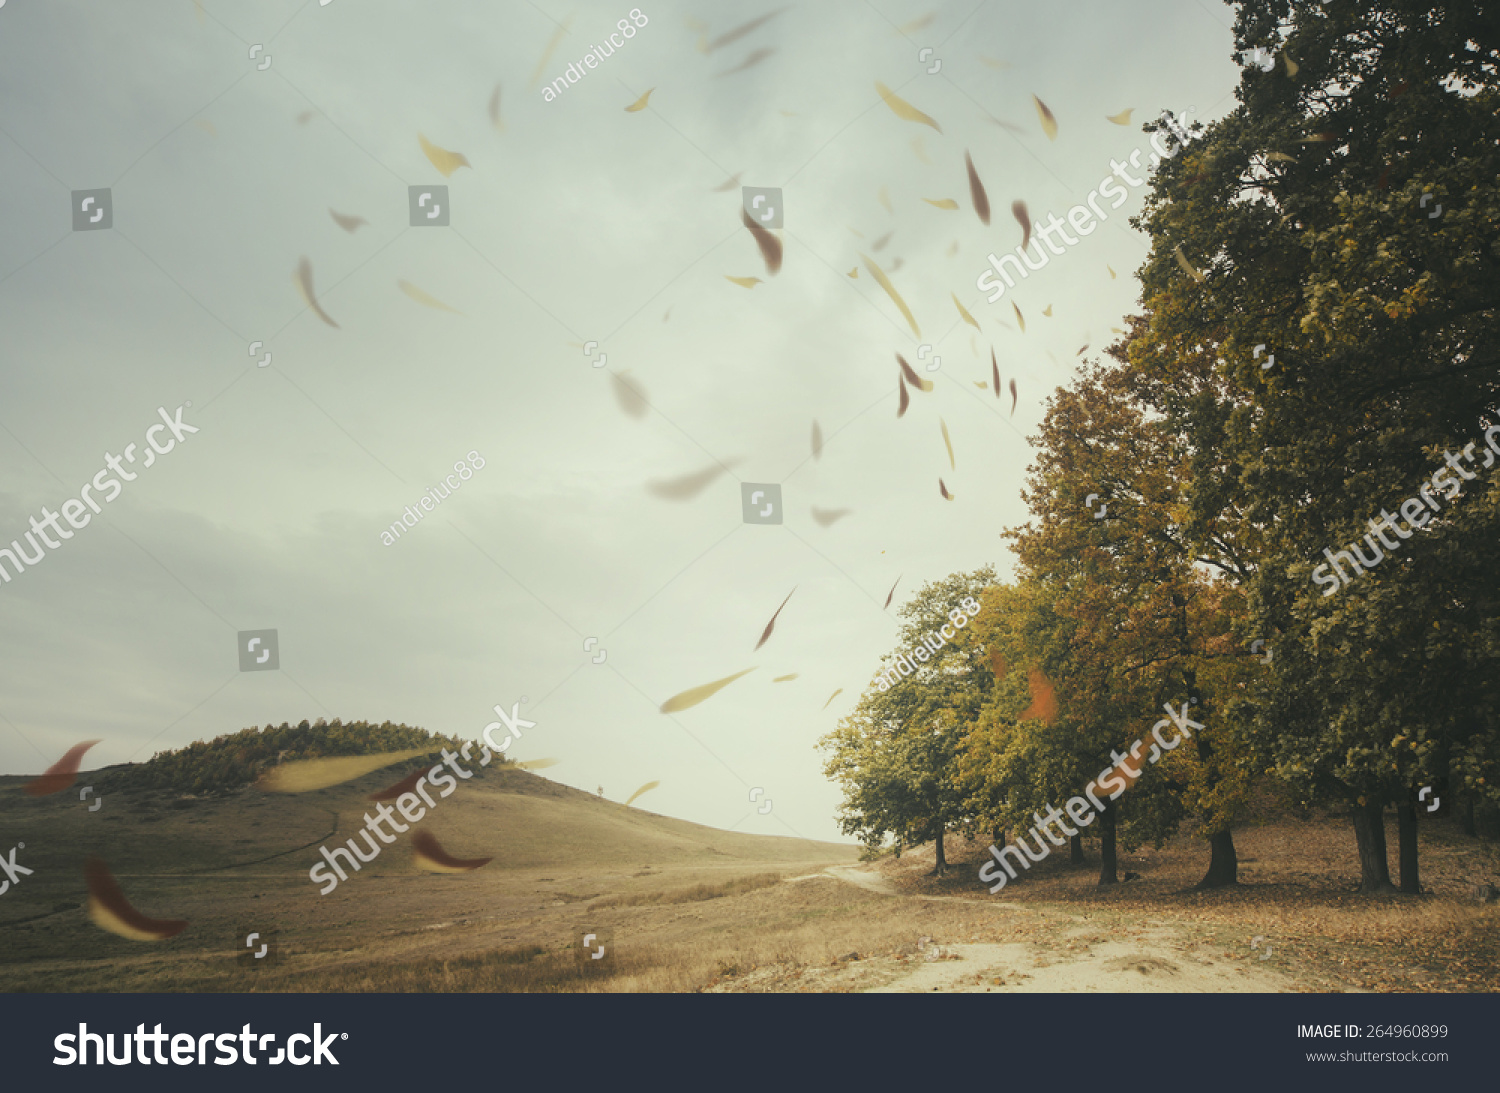 edge of forest with leaves blown by wind #264960899